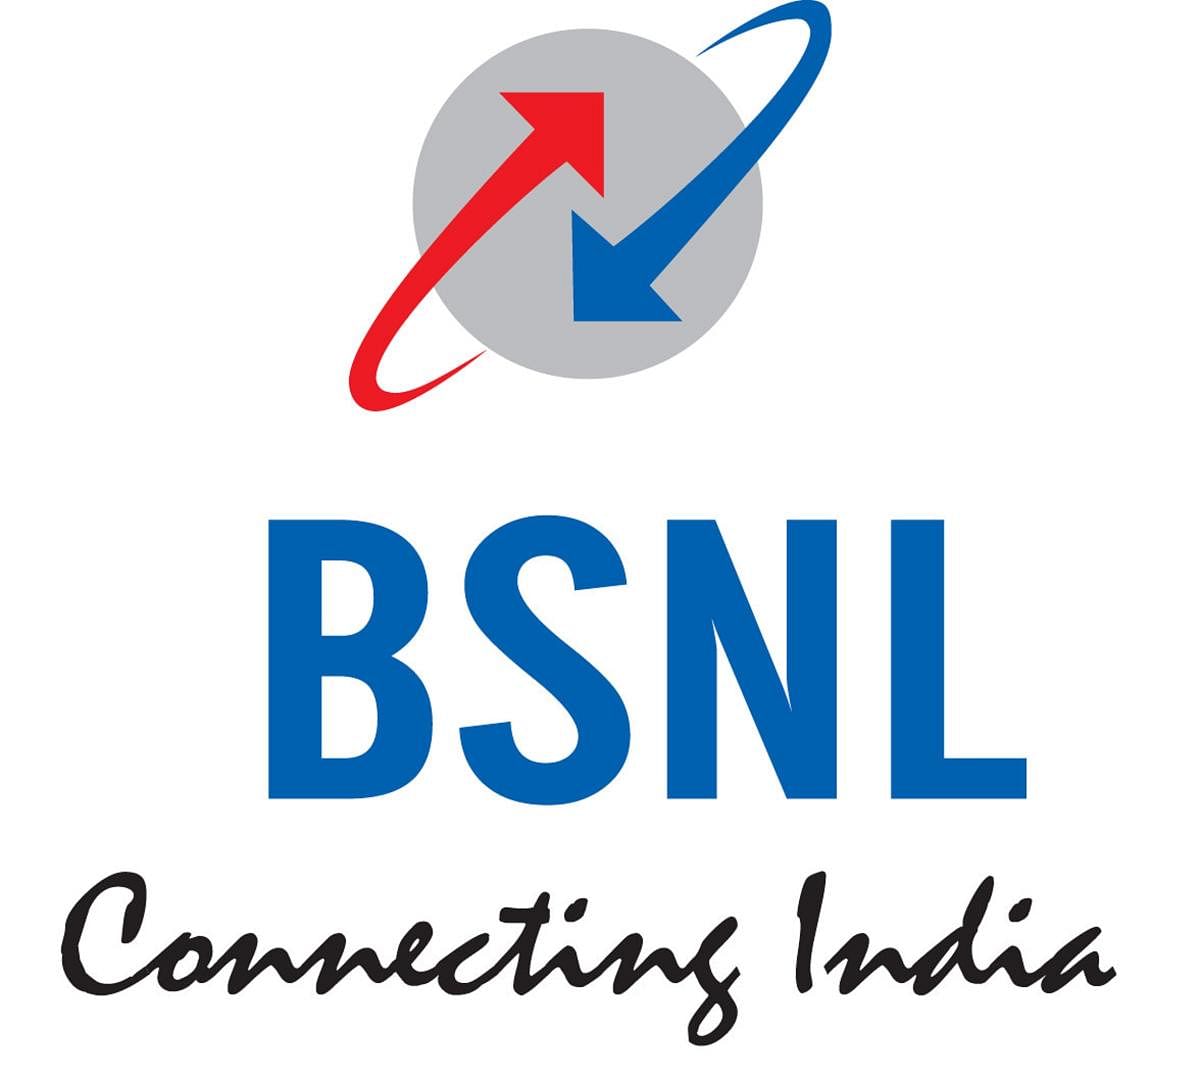 EESL ties up with BSNL to set up 1,000 EV charging stations